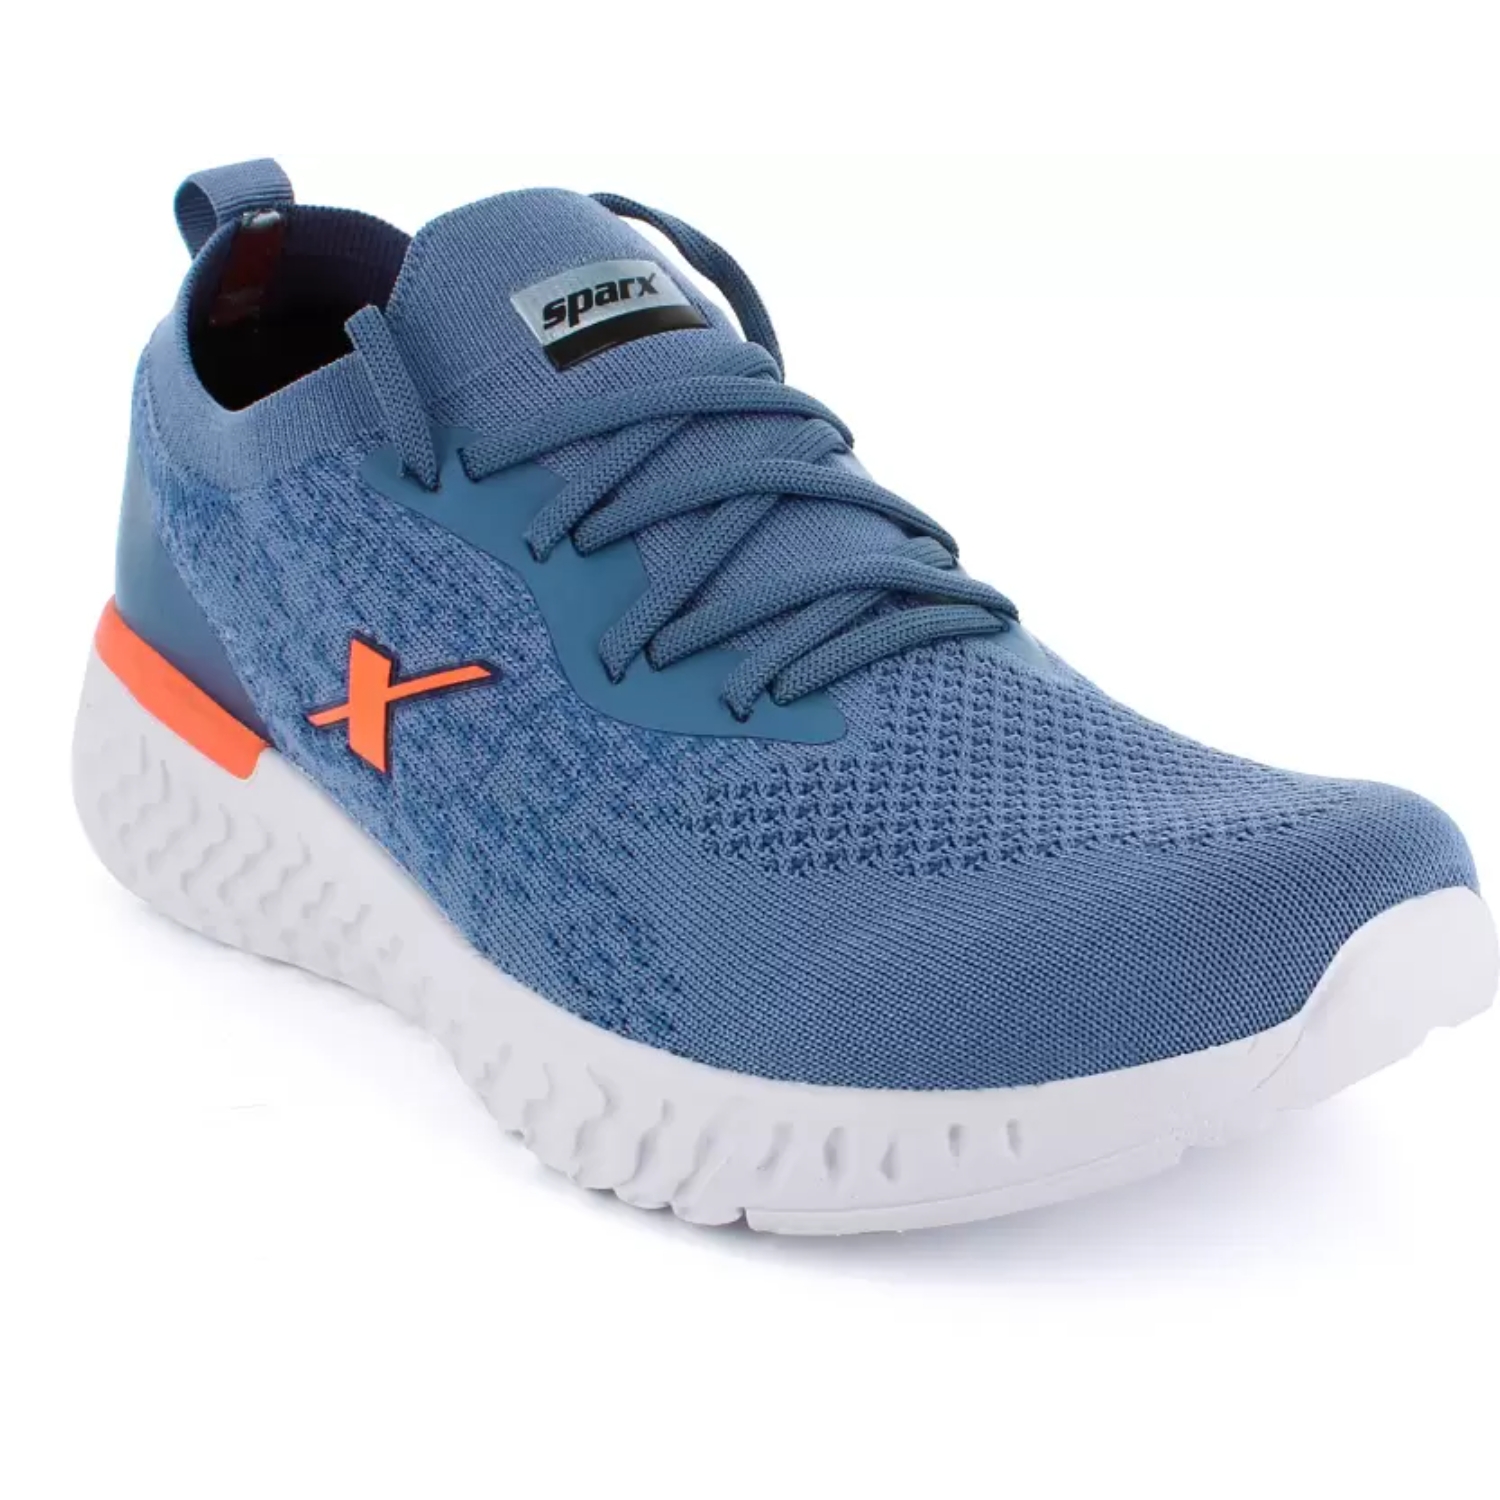 Buy Sparx Navy Running Shoes for Men at Best Price @ Tata CLiQ